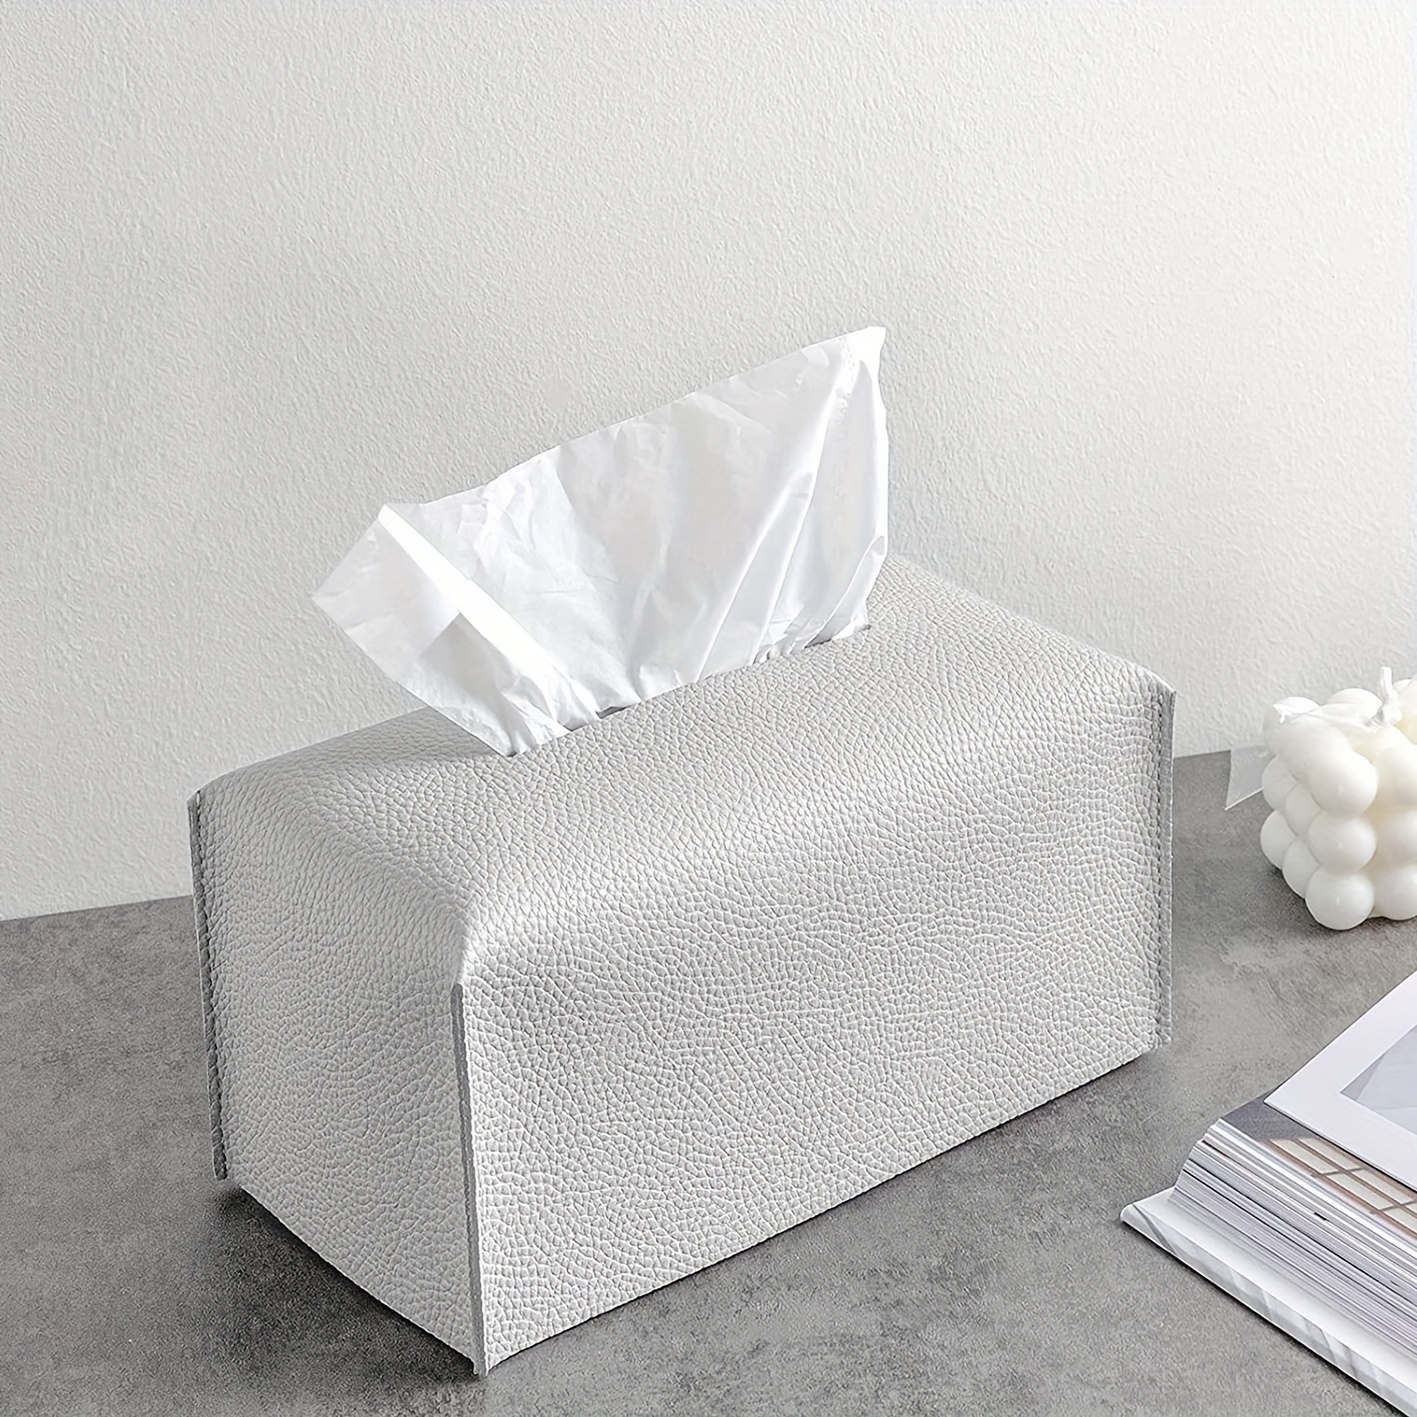 Car Tissue Box Cover Accessories Interior Decoration Tissue Boxes Holder  Inside Paper Pu Leather Block Type Woman Men Black - Tissue Boxes -  AliExpress